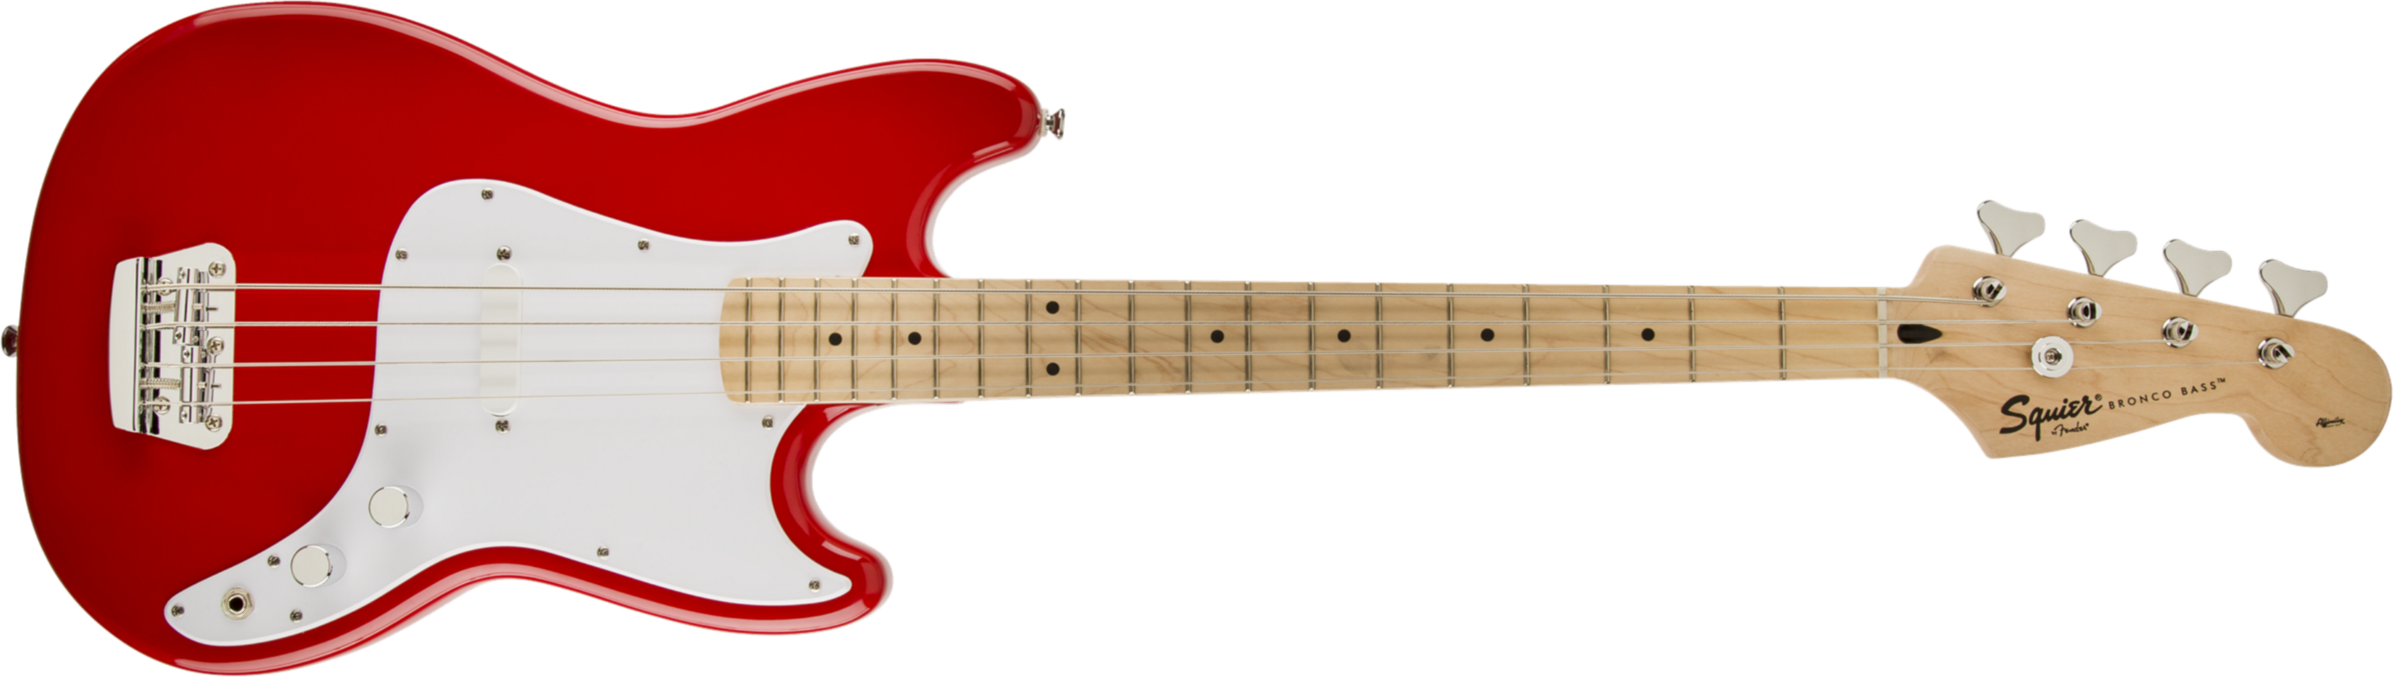 Squier Bronco Bass Mn - Torino Red - Electric bass for kids - Main picture